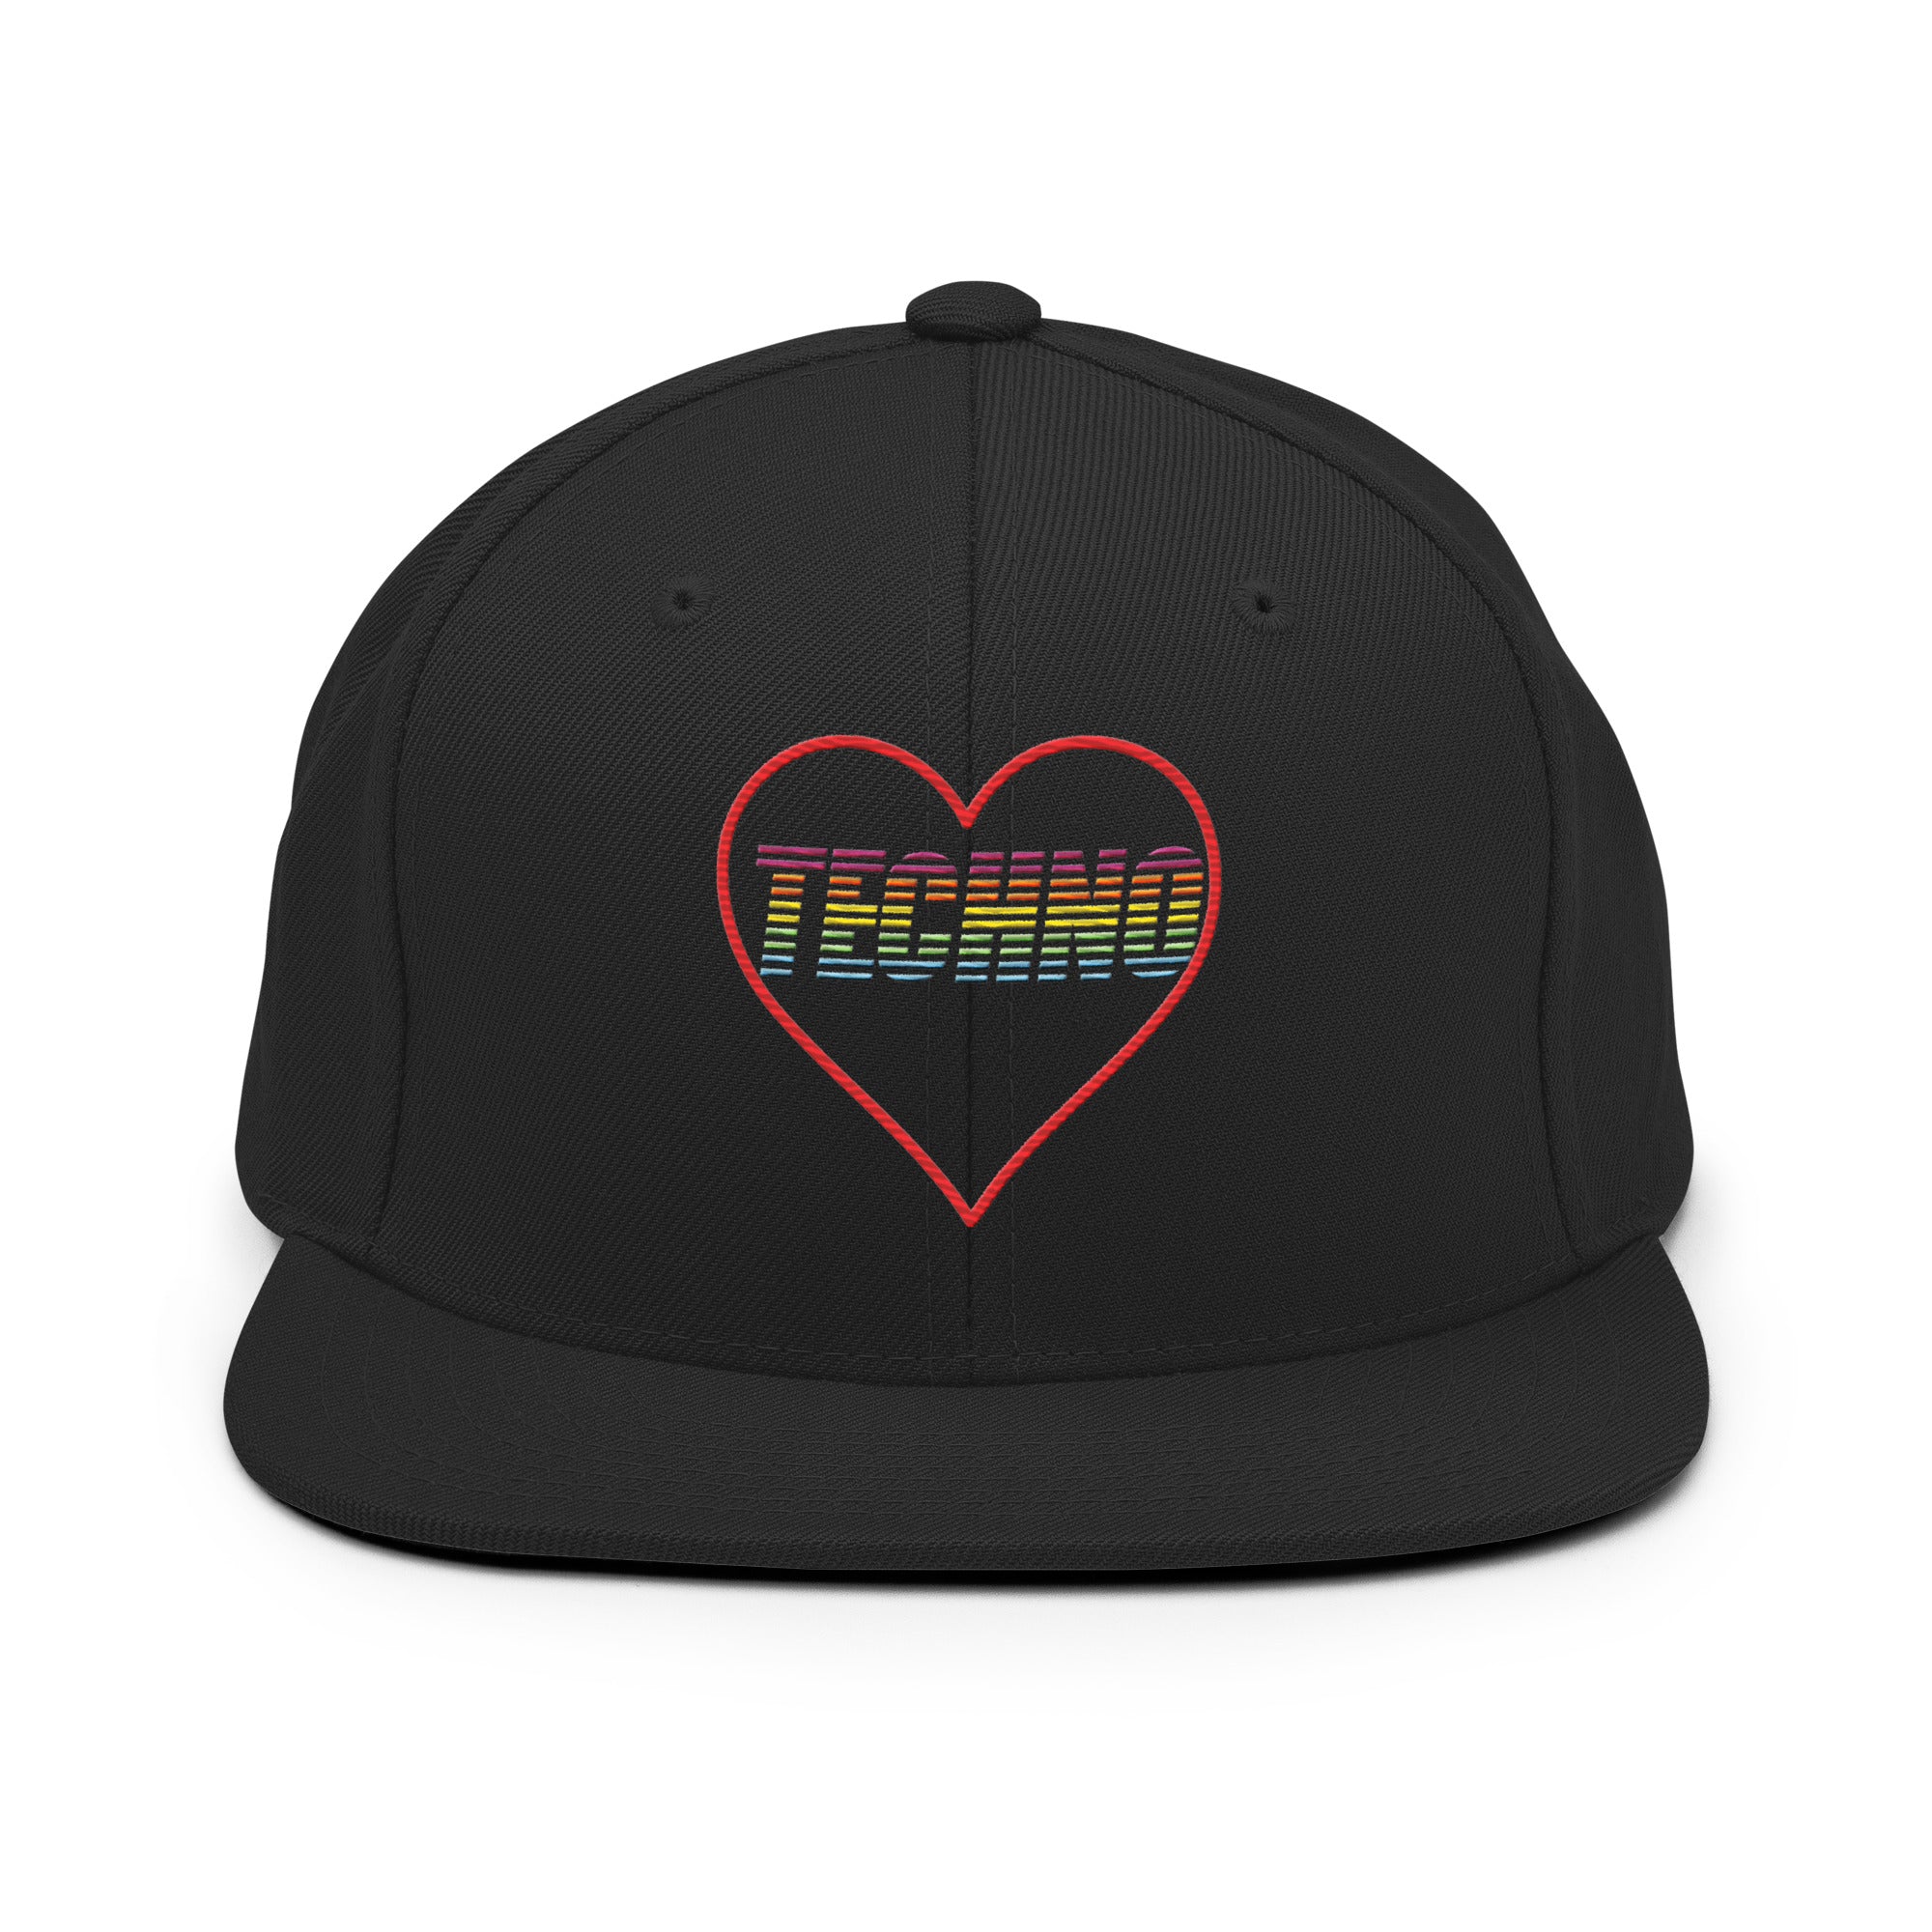 Step into the world of techno with the TECHNO SNAPBACK HAT. This black snapback features a rave inspired print, structured with a classic fit, flat brim, and full buckram. The adjustable snap closure ensures a comfortable, one-size-fits-most fit. Experience the perfect blend of style and comfort at any rave or festival!